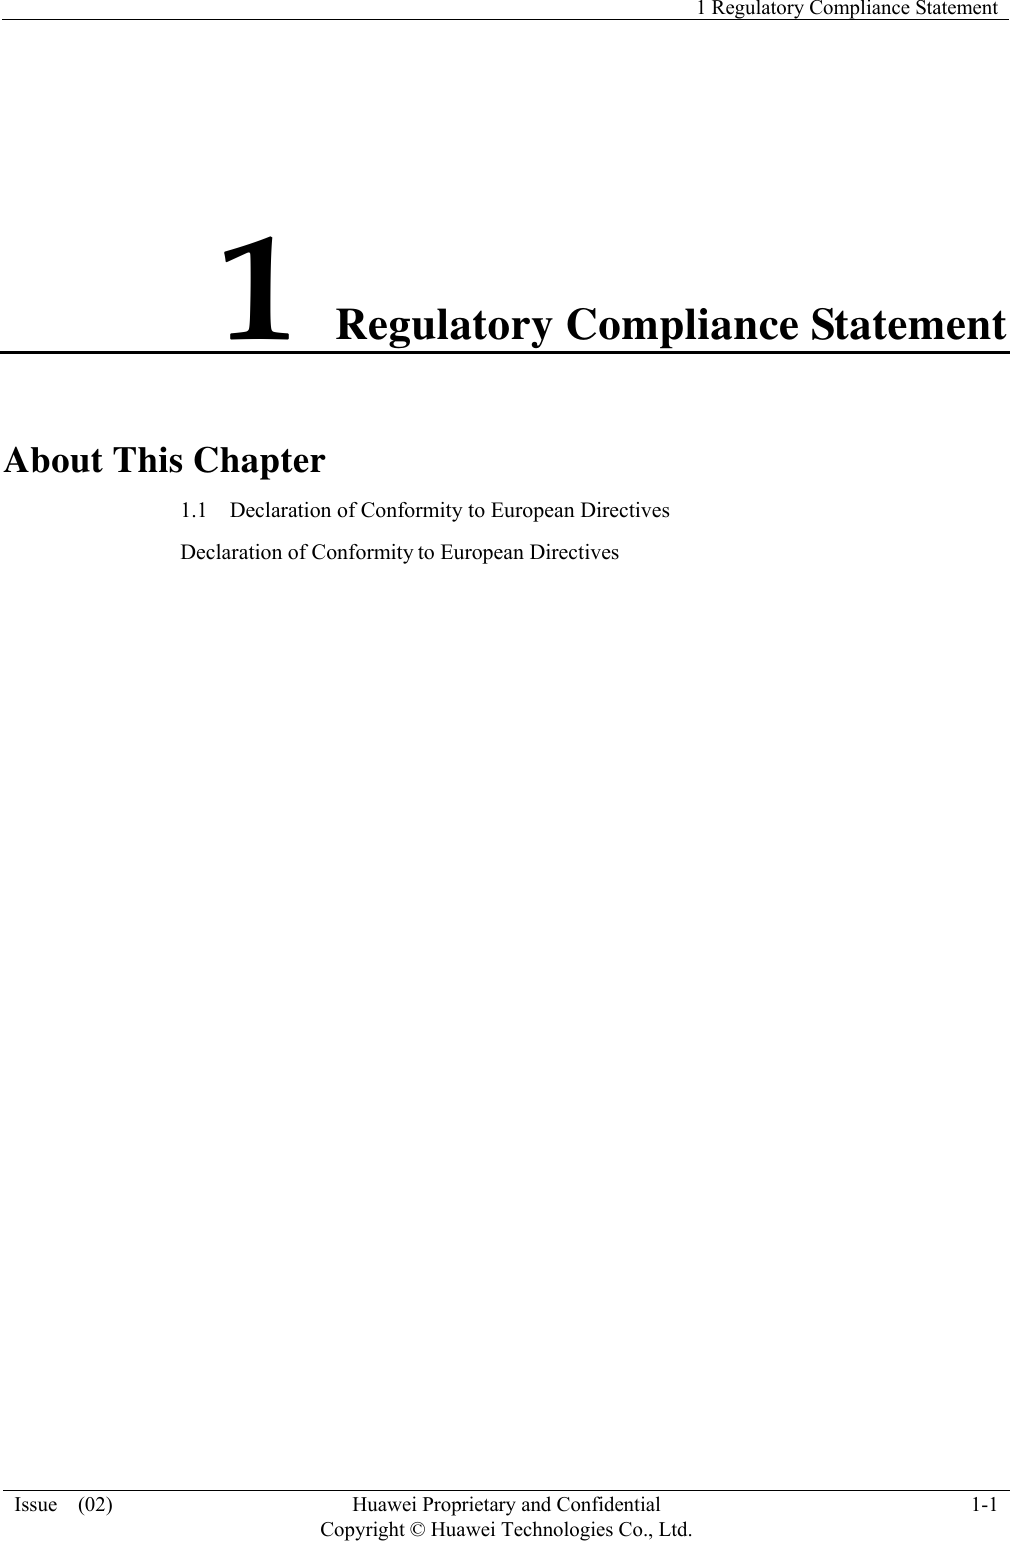   1 Regulatory Compliance Statement Issue  (02)  Huawei Proprietary and Confidential     Copyright © Huawei Technologies Co., Ltd.1-1 1 Regulatory Compliance Statement About This Chapter 1.1    Declaration of Conformity to European Directives Declaration of Conformity to European Directives 